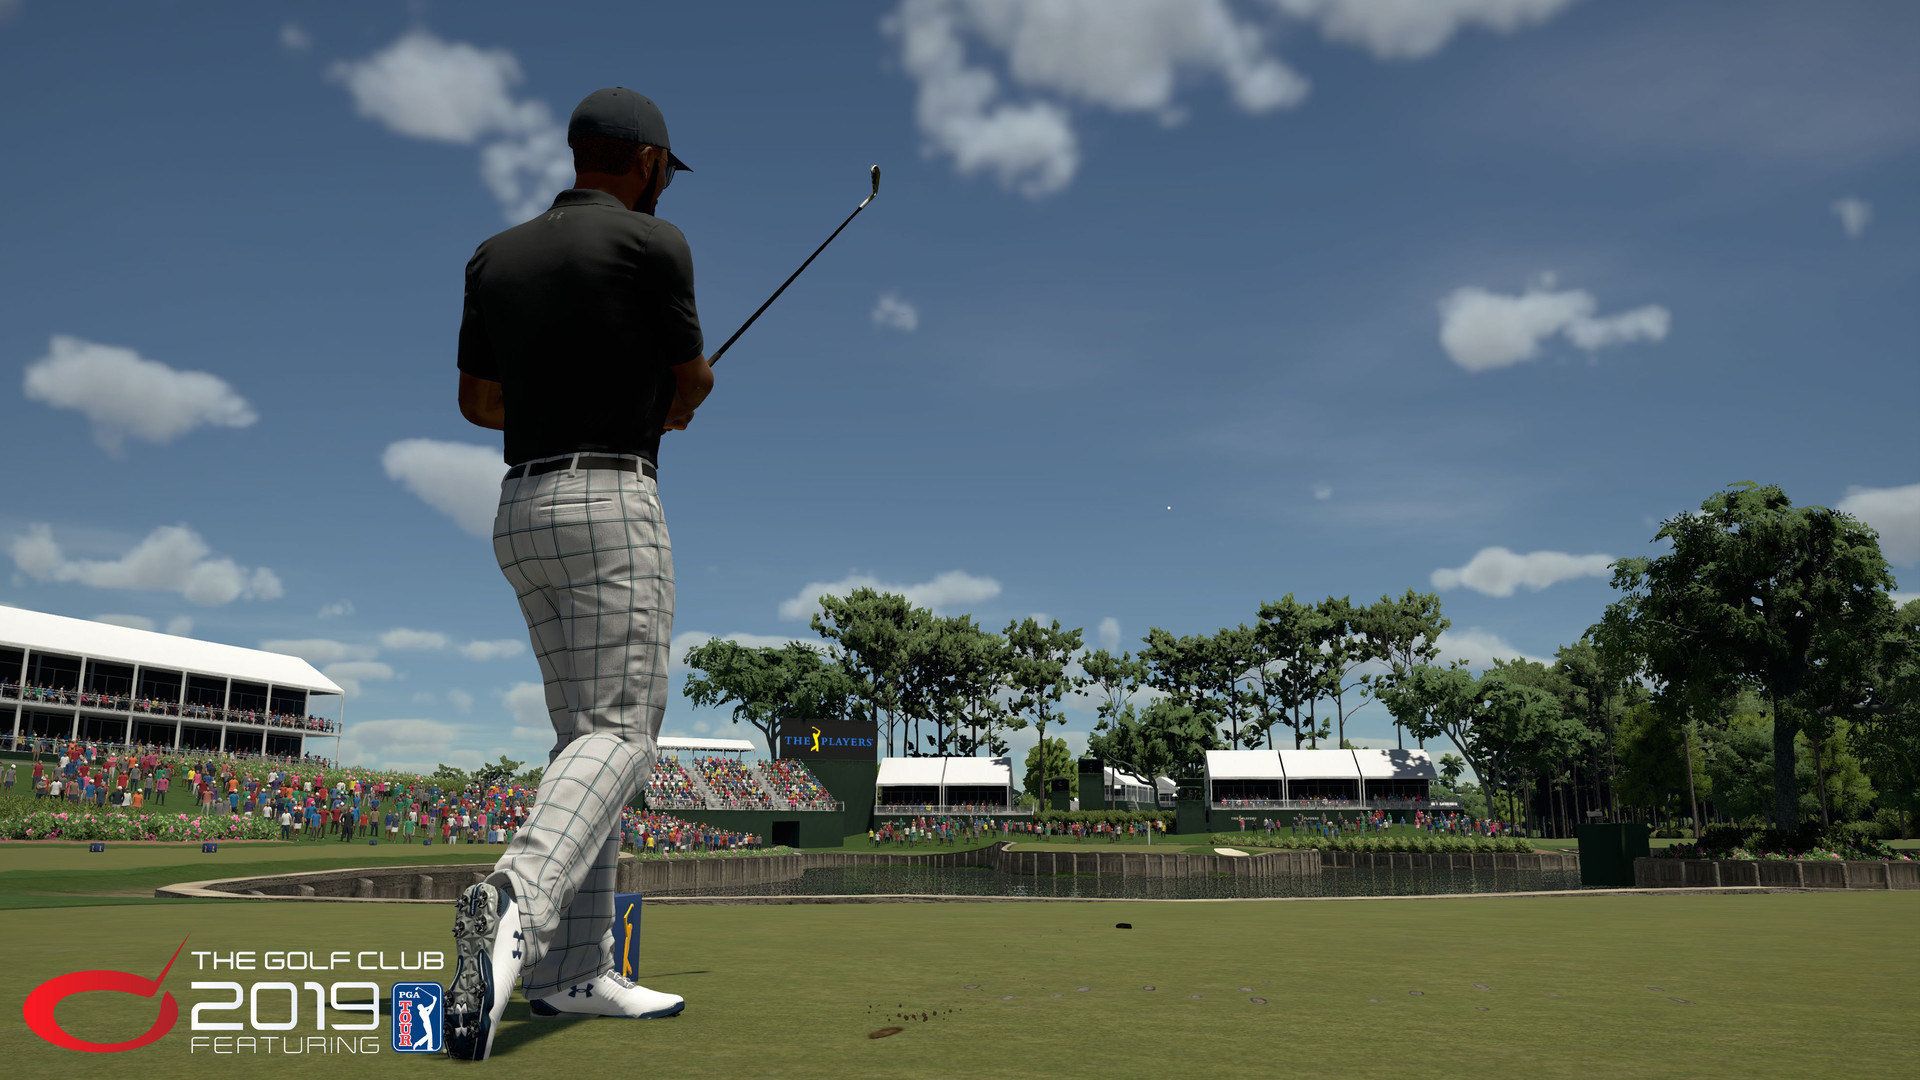 Save 80% on The Golf Club™ 2019 featuring PGA TOUR on Steam